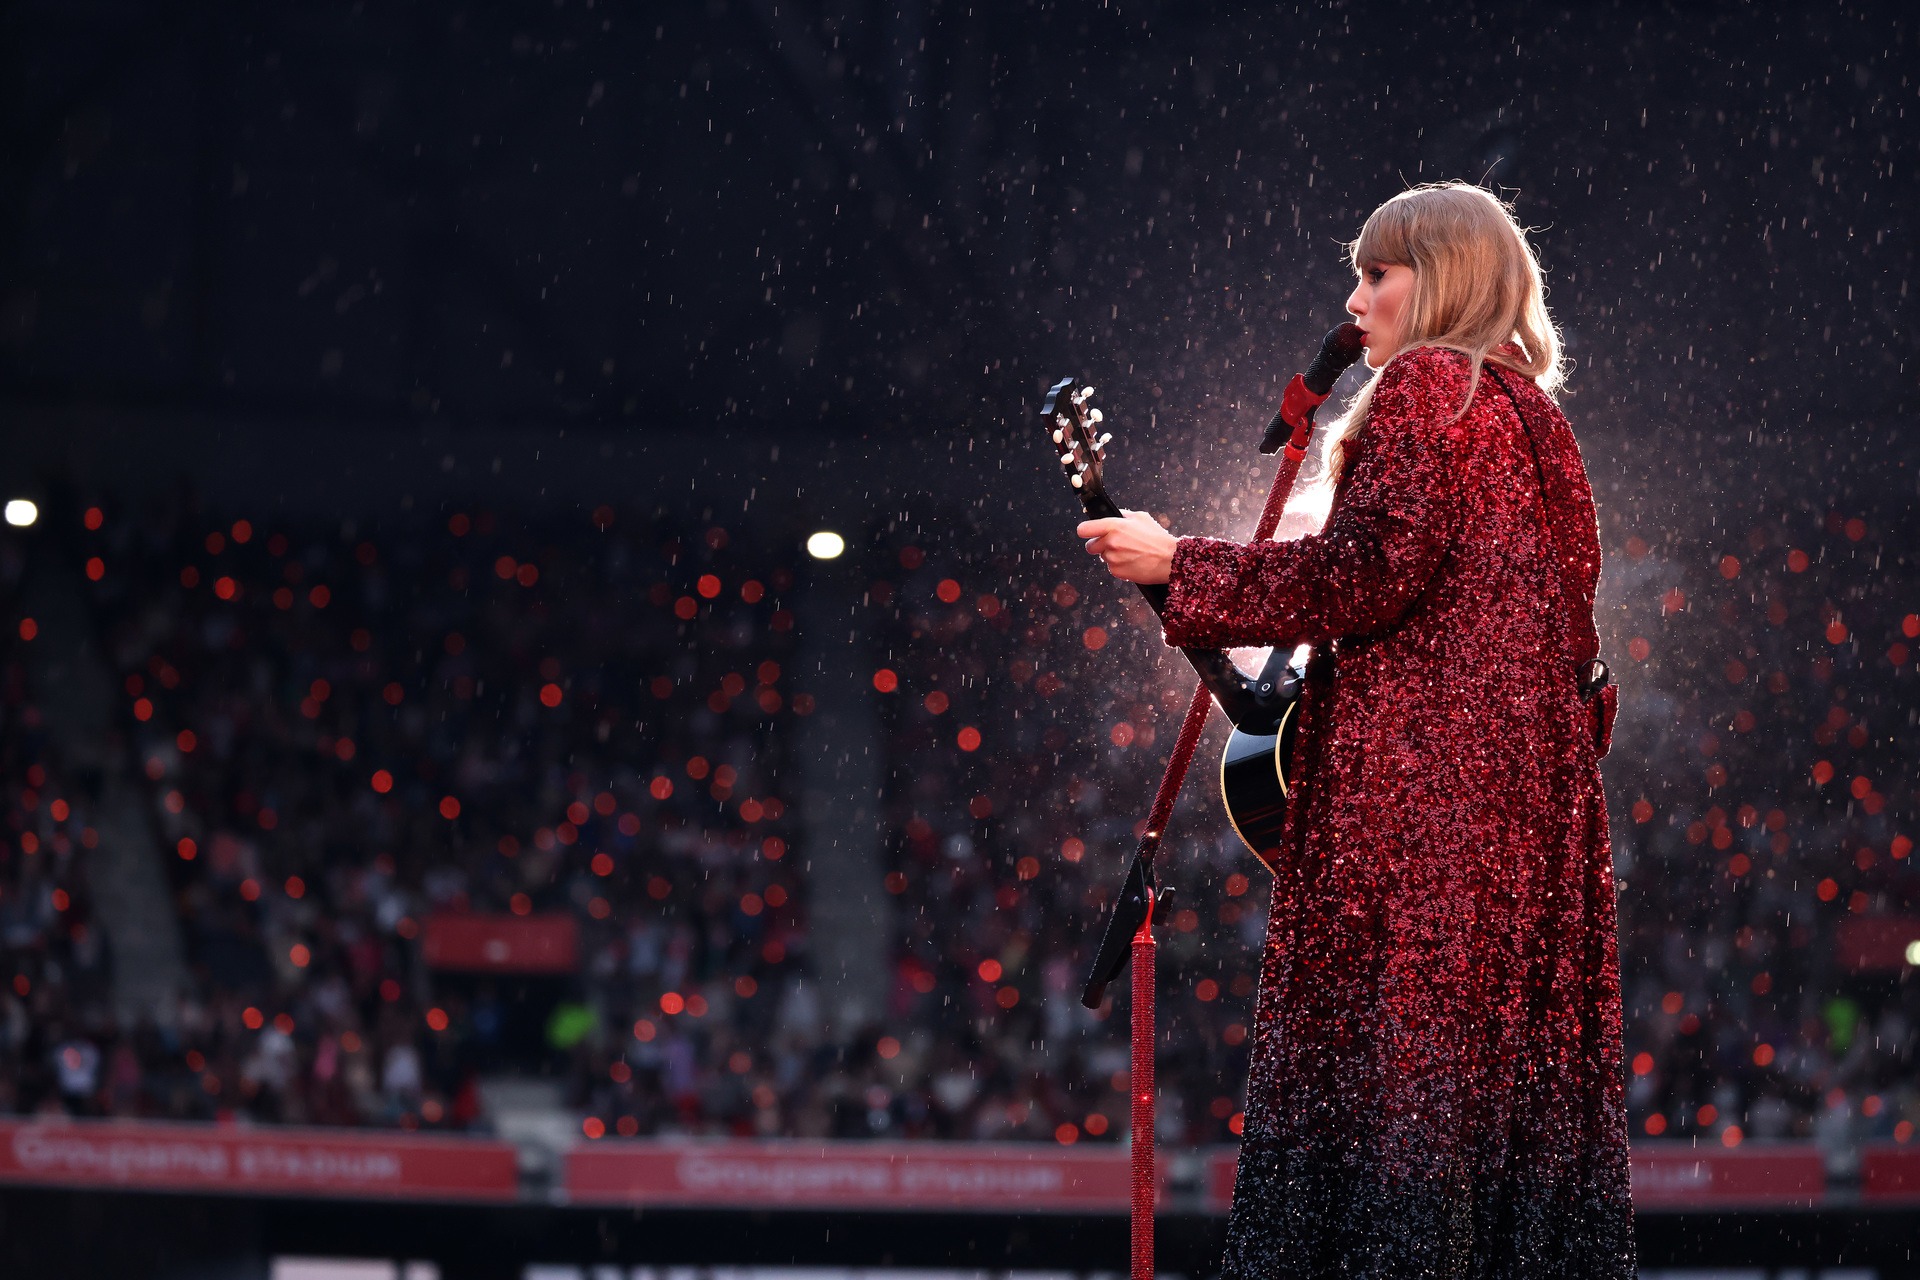 The rain came pouring down at Swift's last concert in Lyon, but will Edinburgh suffer the same fate?